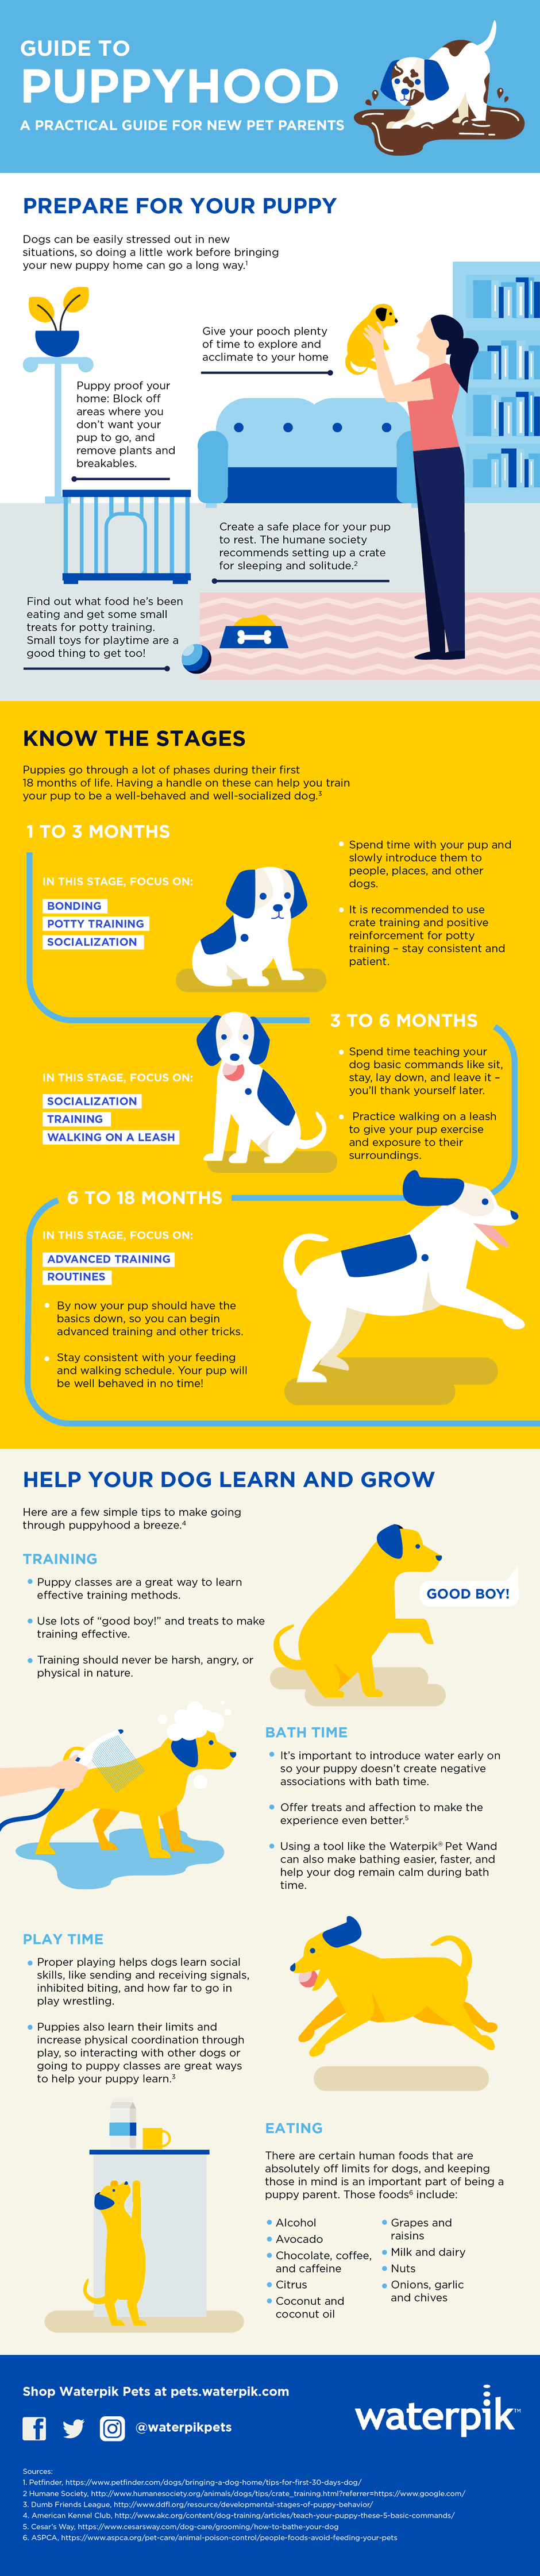 New Puppy Guide